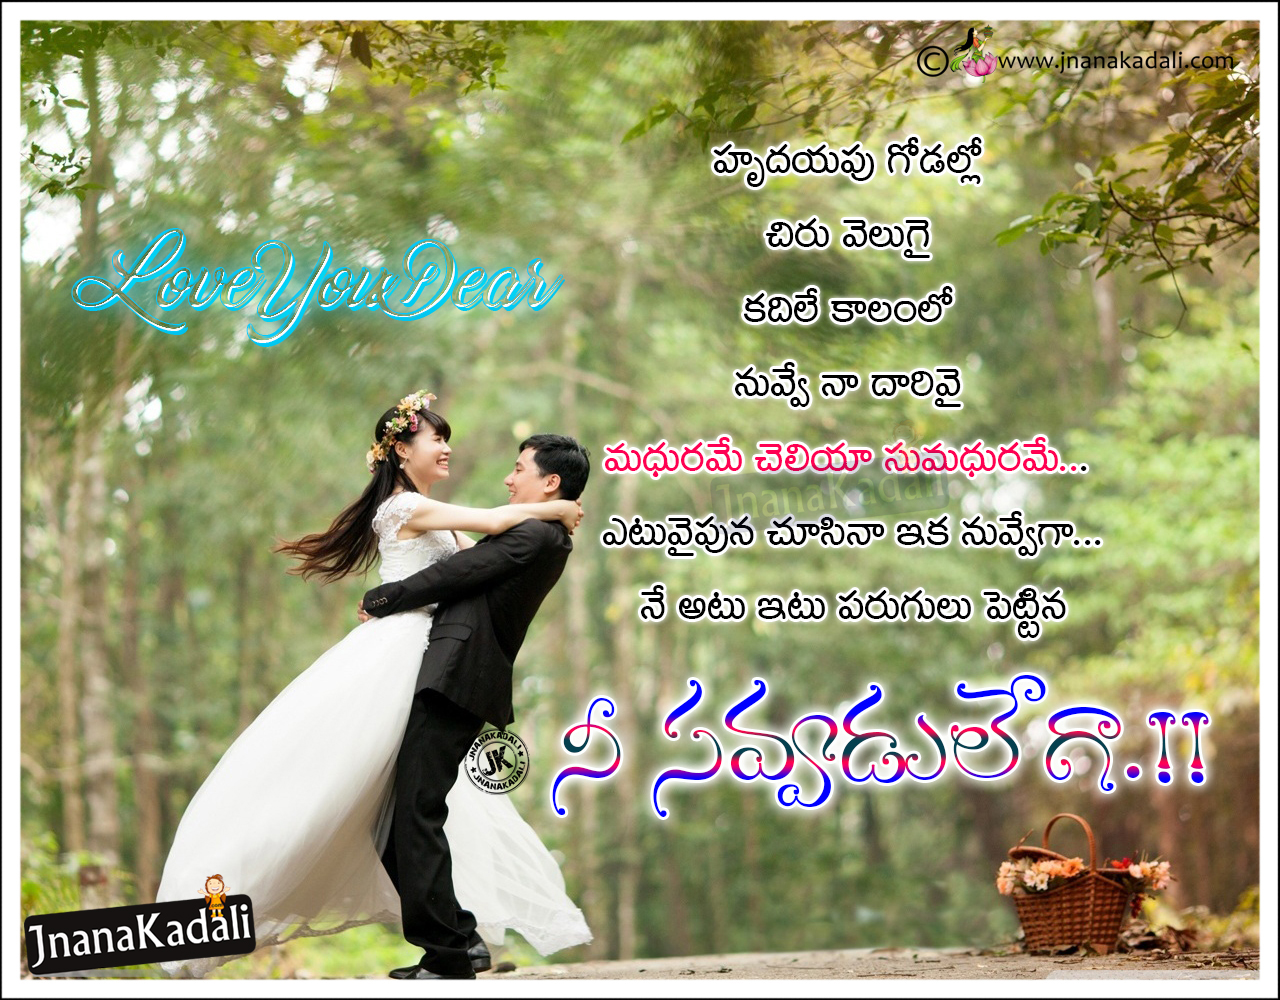 Romantic Telugu Love Quotes-Couple hd Wallpapers With Romantic Poetry